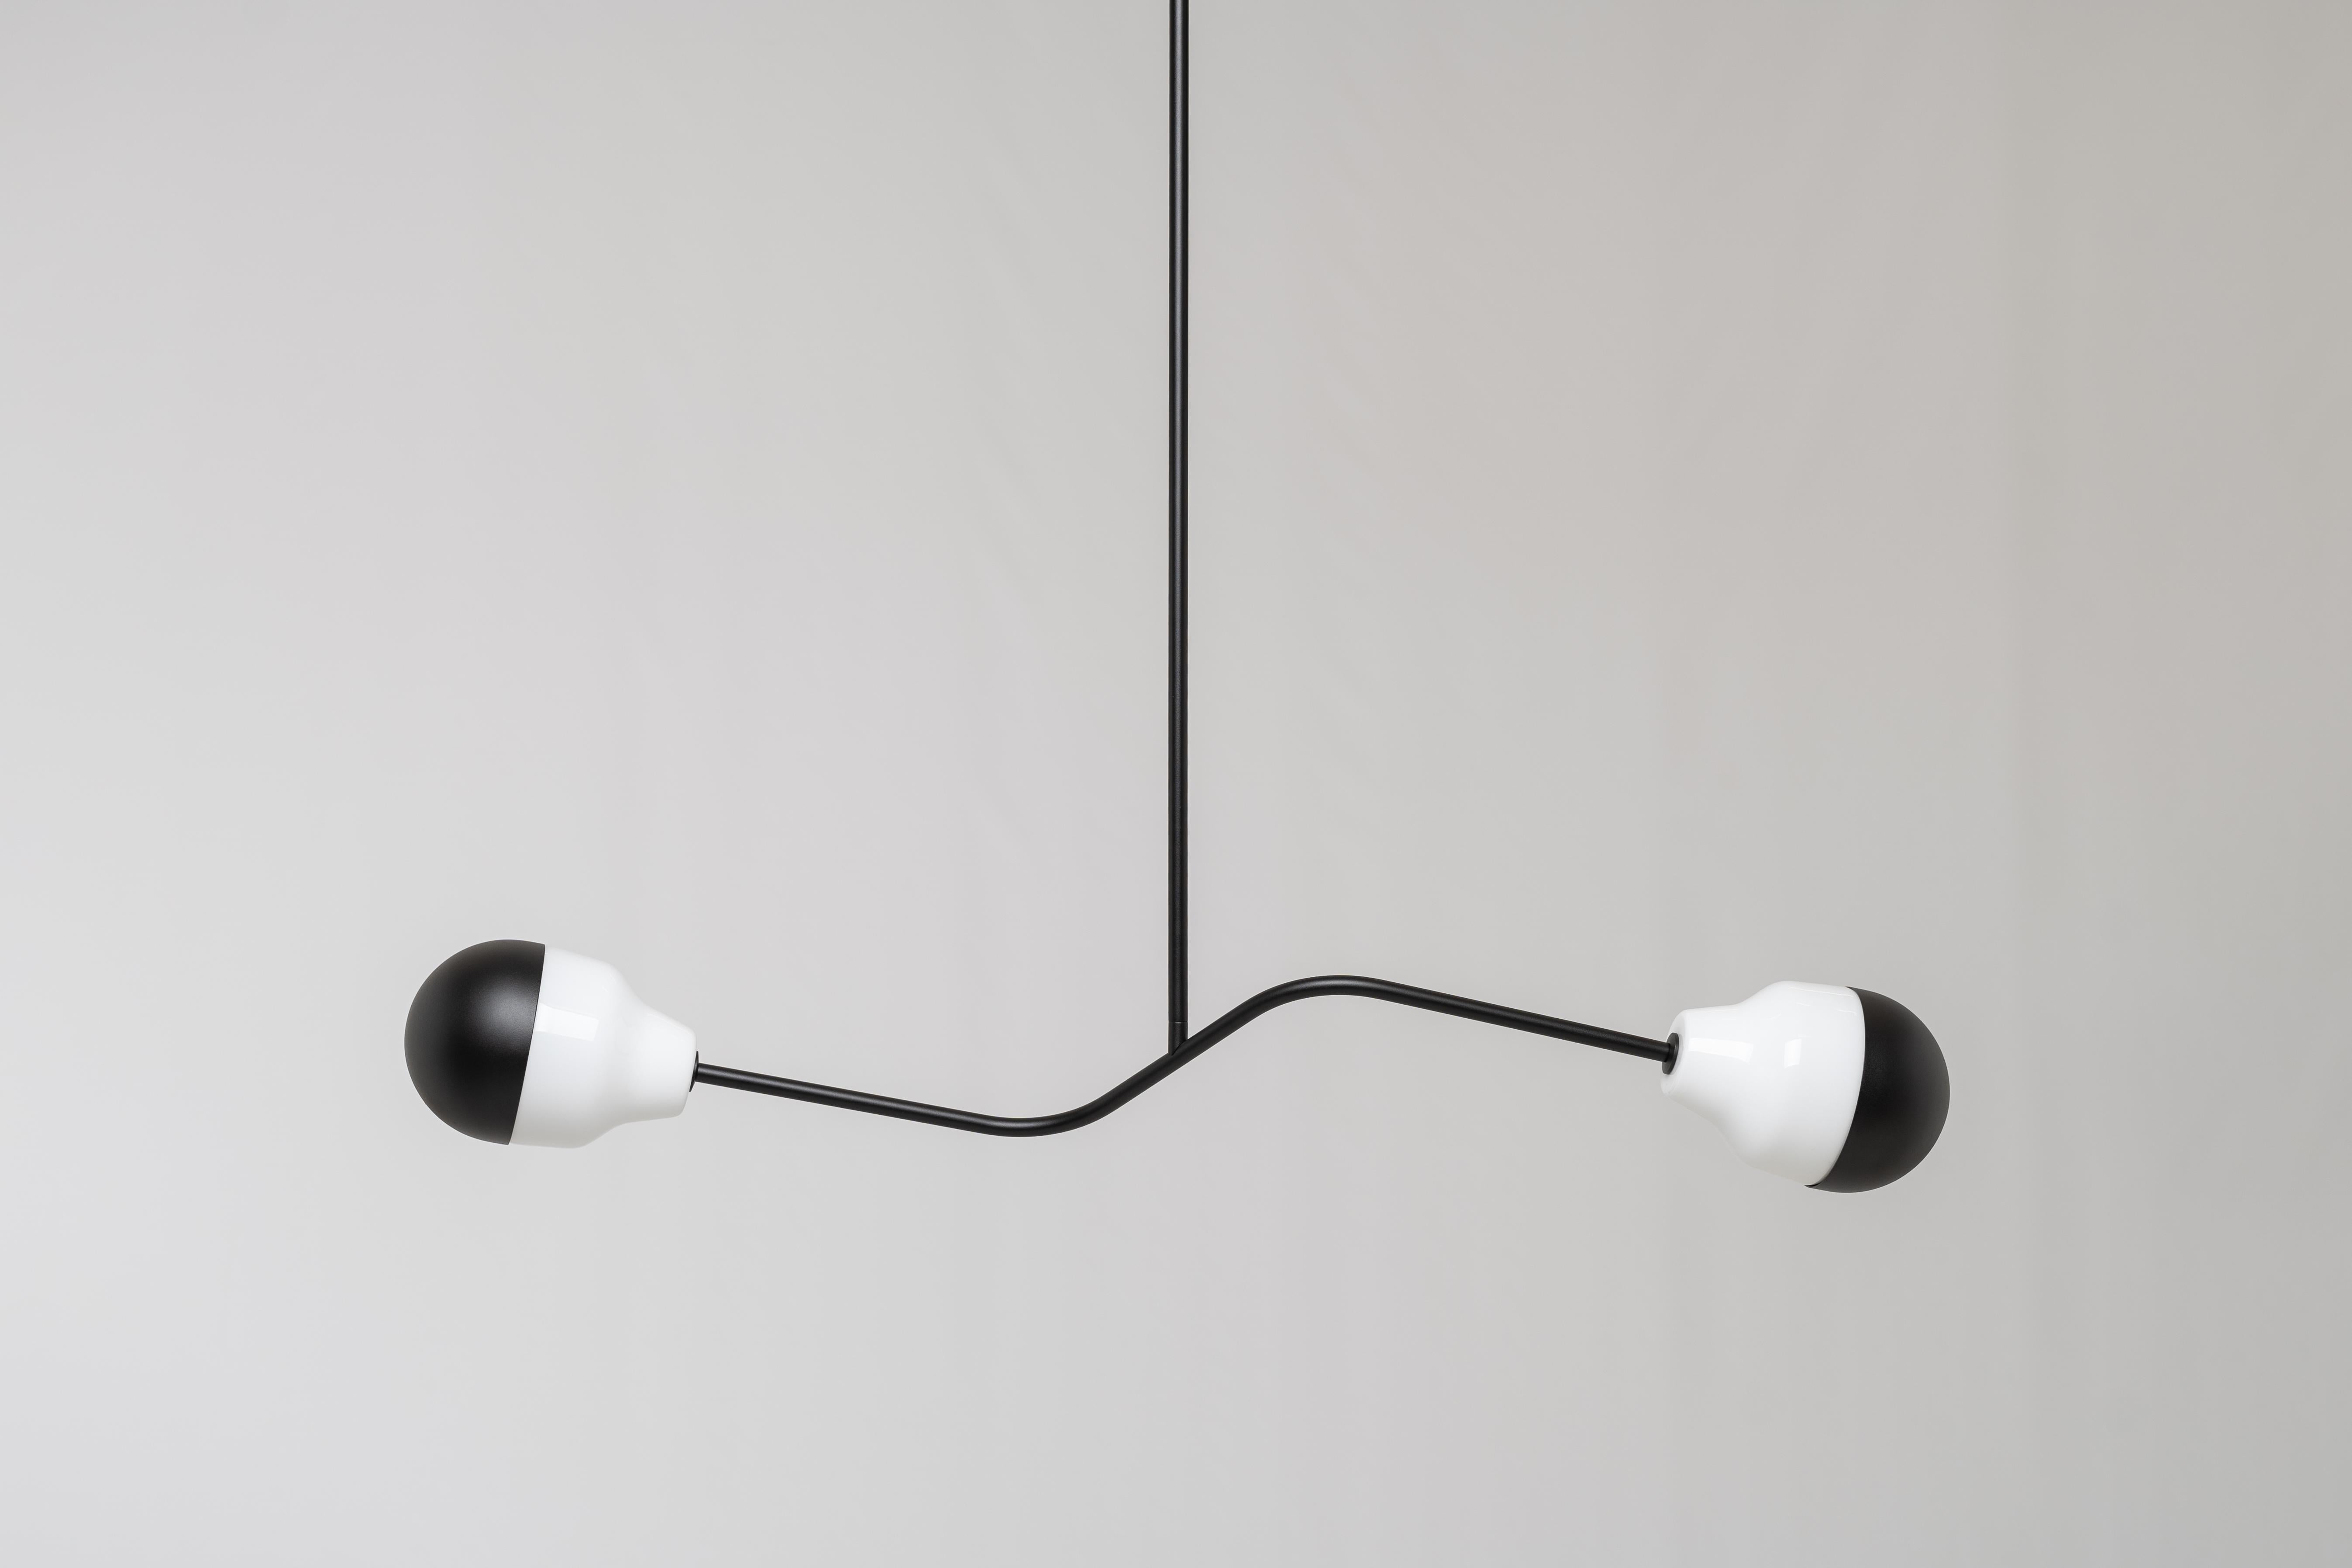 Ambiguo type-04 by Saarepera & Mae
Chandelier

Materials: Mouth-blown Murano glass / stainless steel and aluminum
Light source: Built-in LED 100-240V / Dimmable

Dimensions: 
L 126 cm / 49.6 in
W 17.5 cm / 6.9 in

Fixing: 
Hanging from a